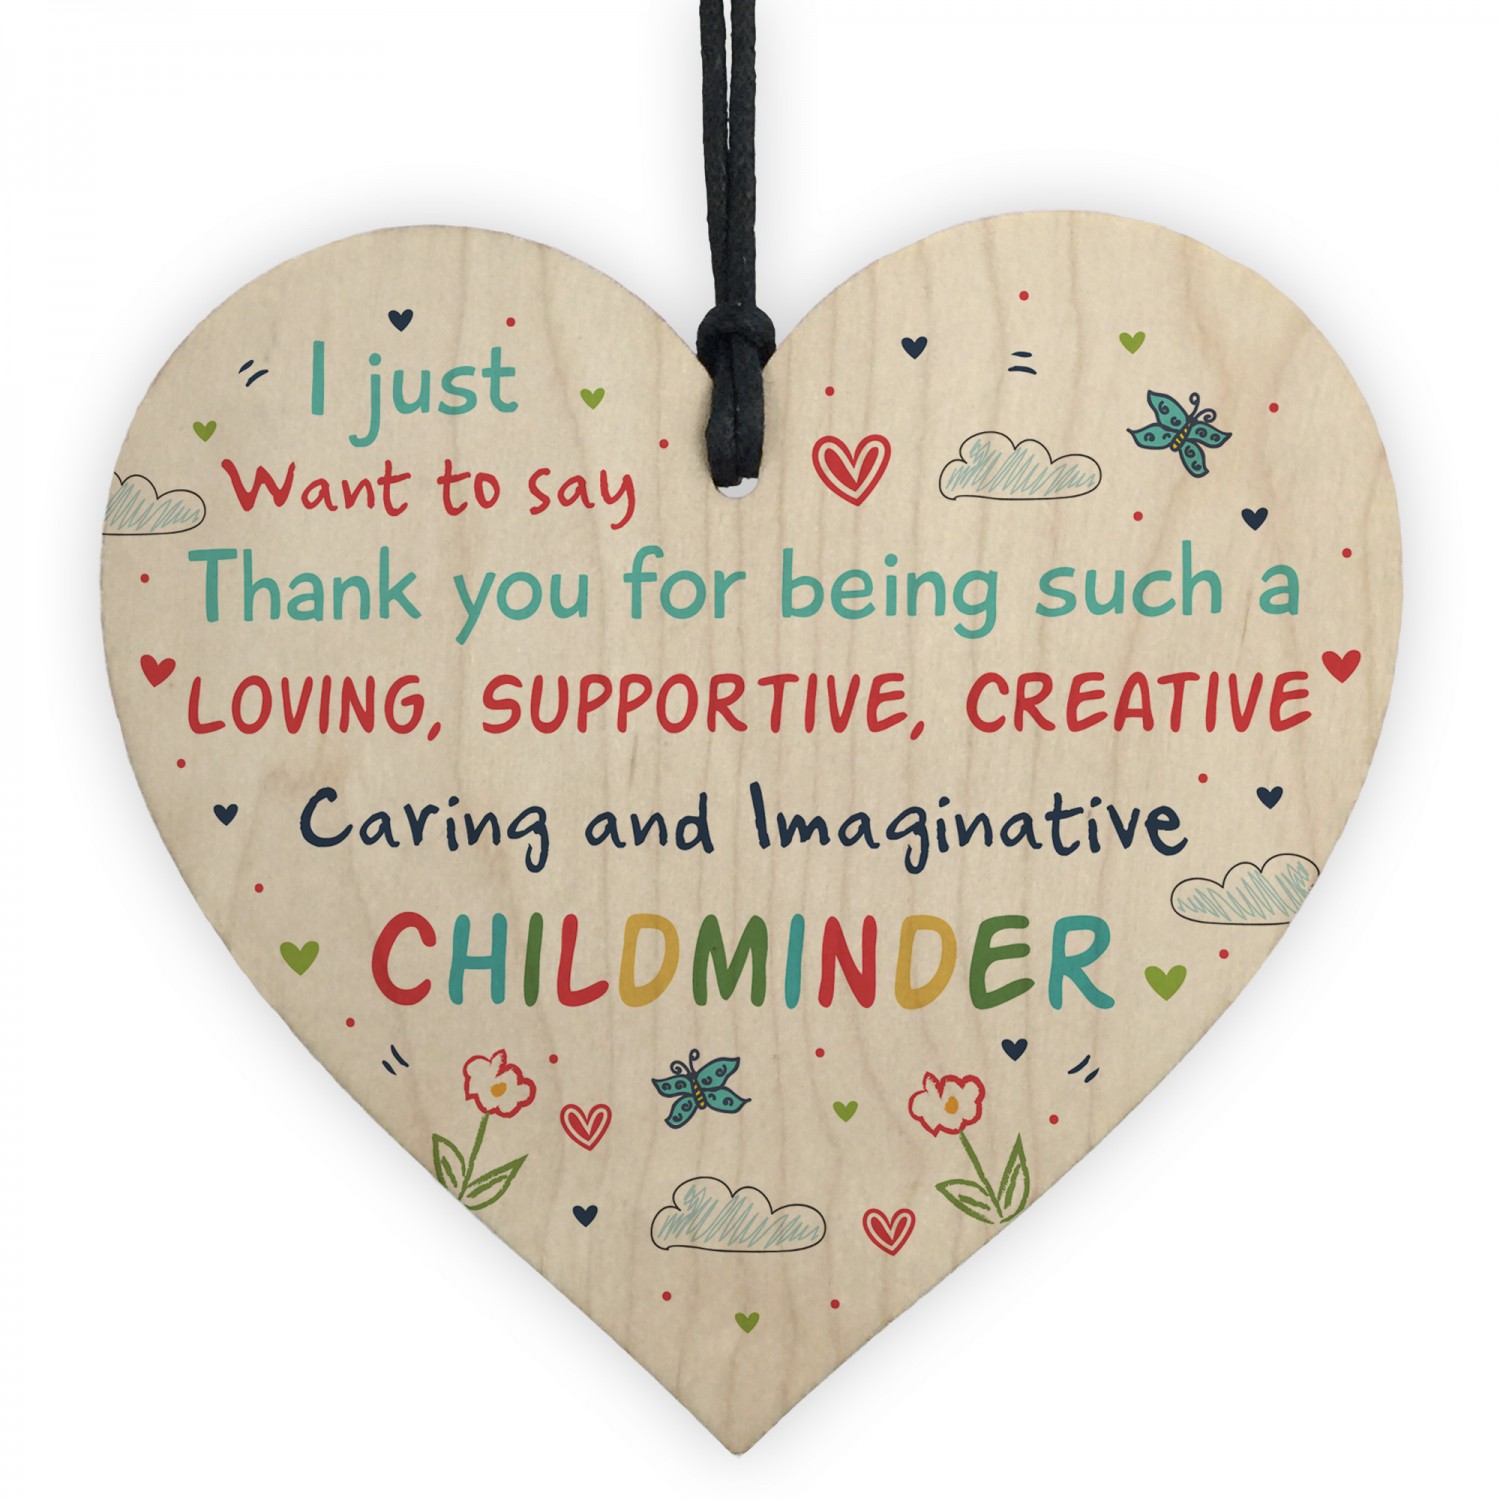 GIFT IDEAS FOR CHILDMINDER HEART PLAQUE THANK YOU CHRISTMAS PRESENT